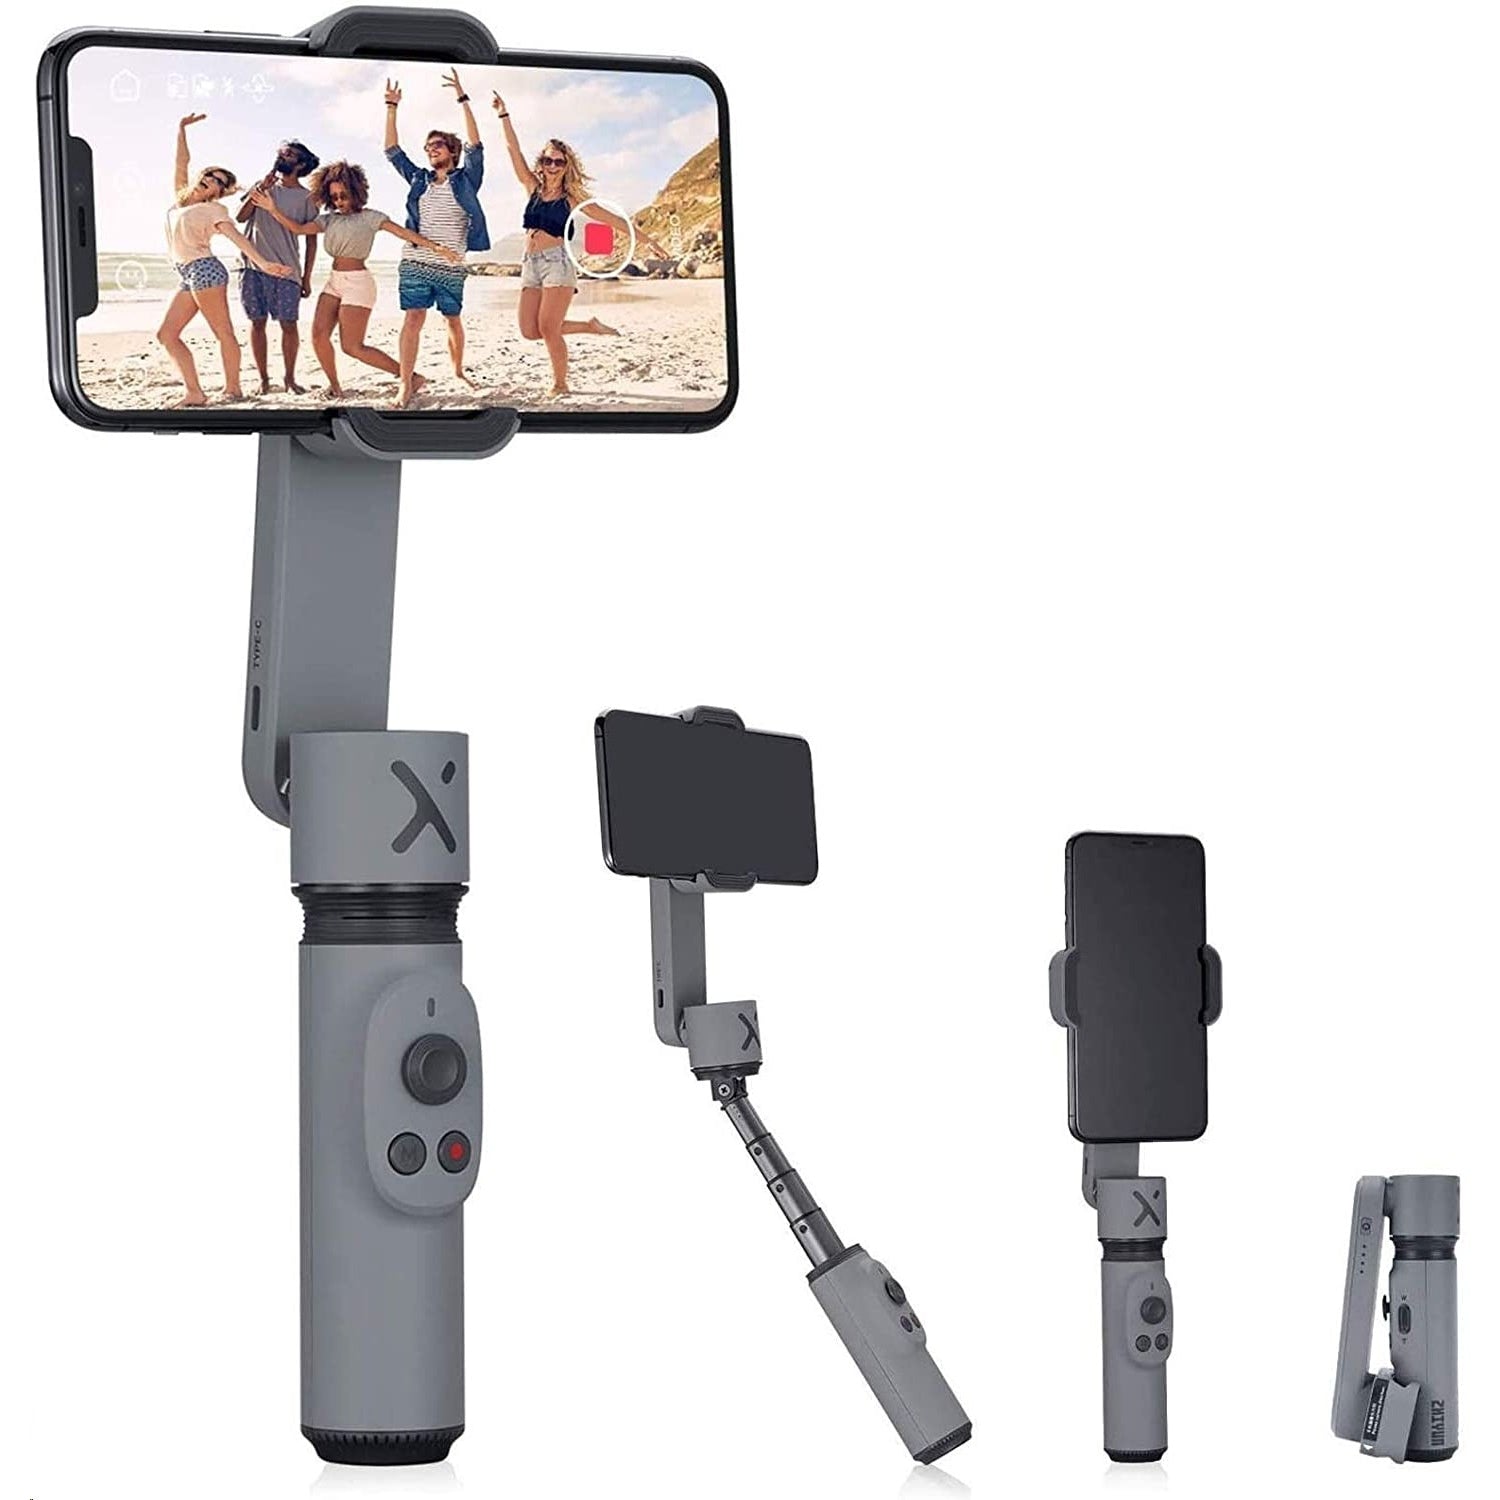 Product Image of ZHIYUN Smooth X essential combo Foldable Handheld Smartphone Gimbal Stabilizer - Grey